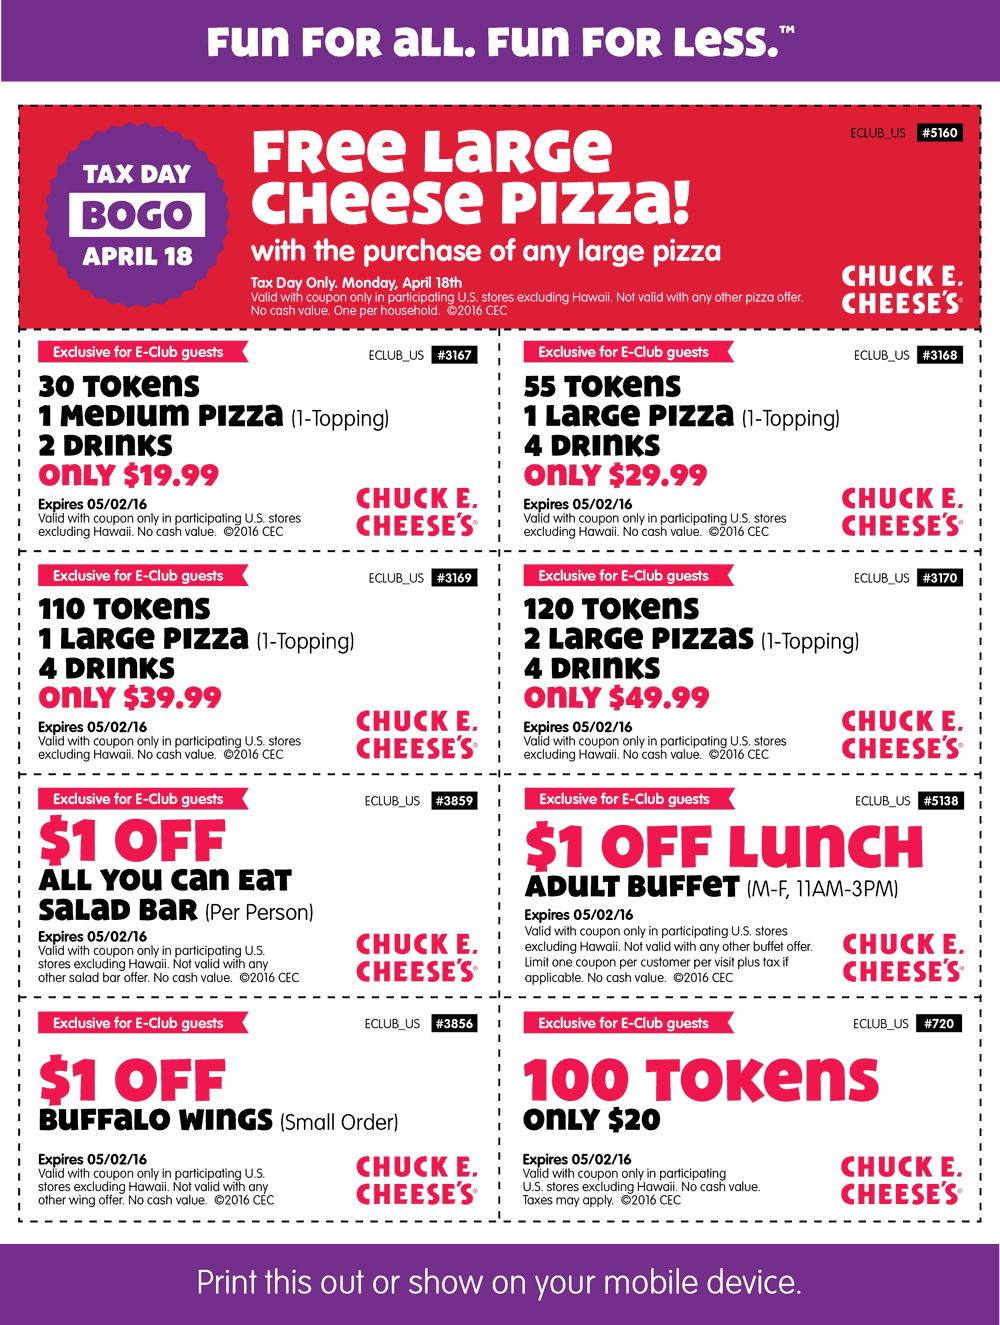 chuck-e-cheese-coupons-in-houston-tx